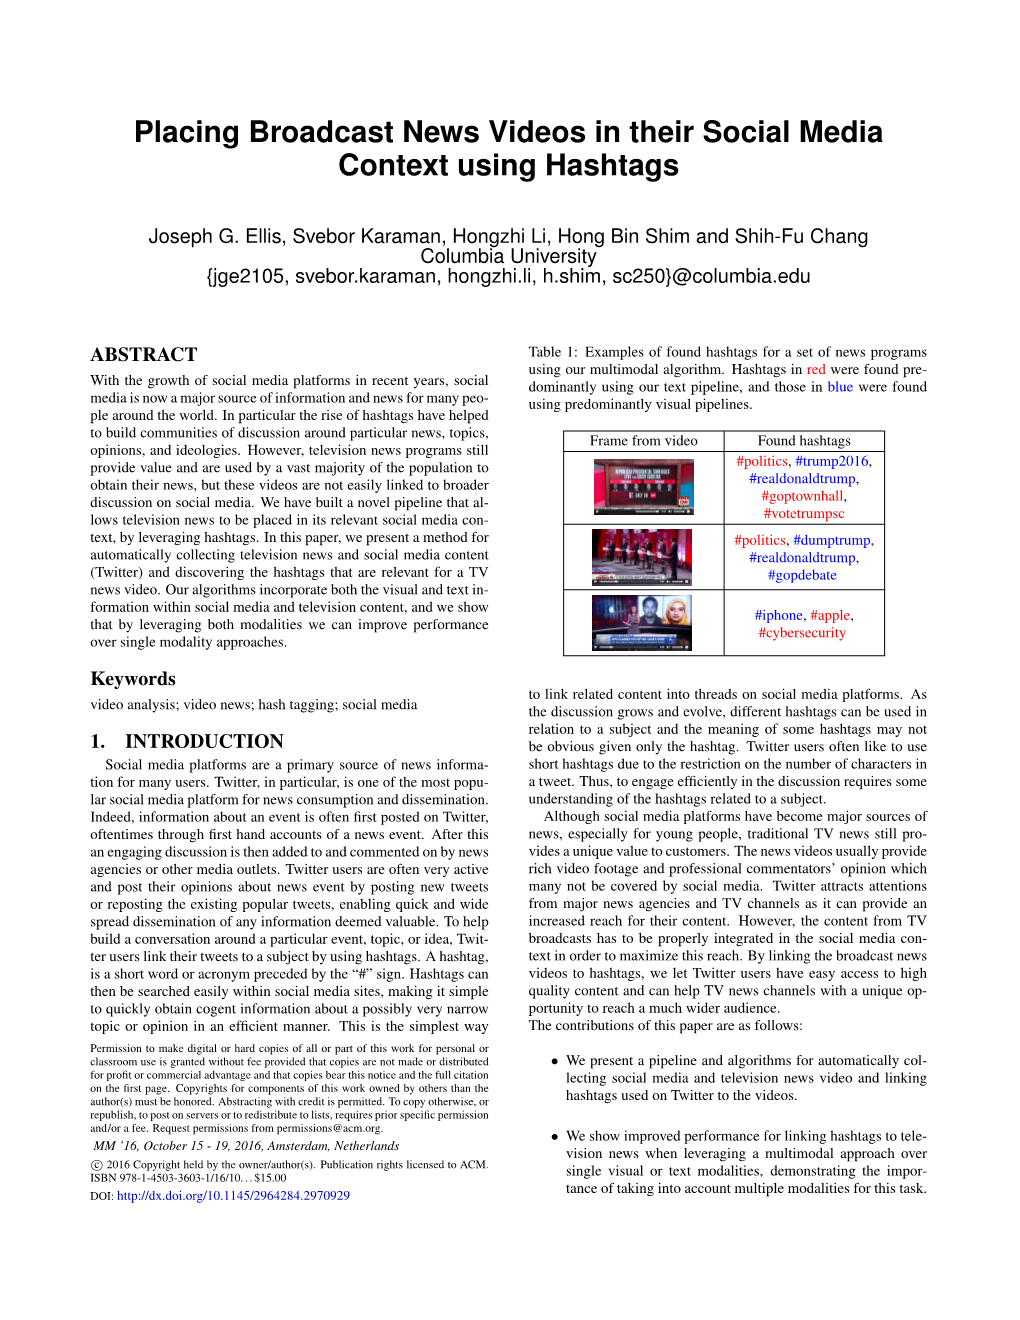 Placing Broadcast News Videos in Their Social Media Context Using Hashtags